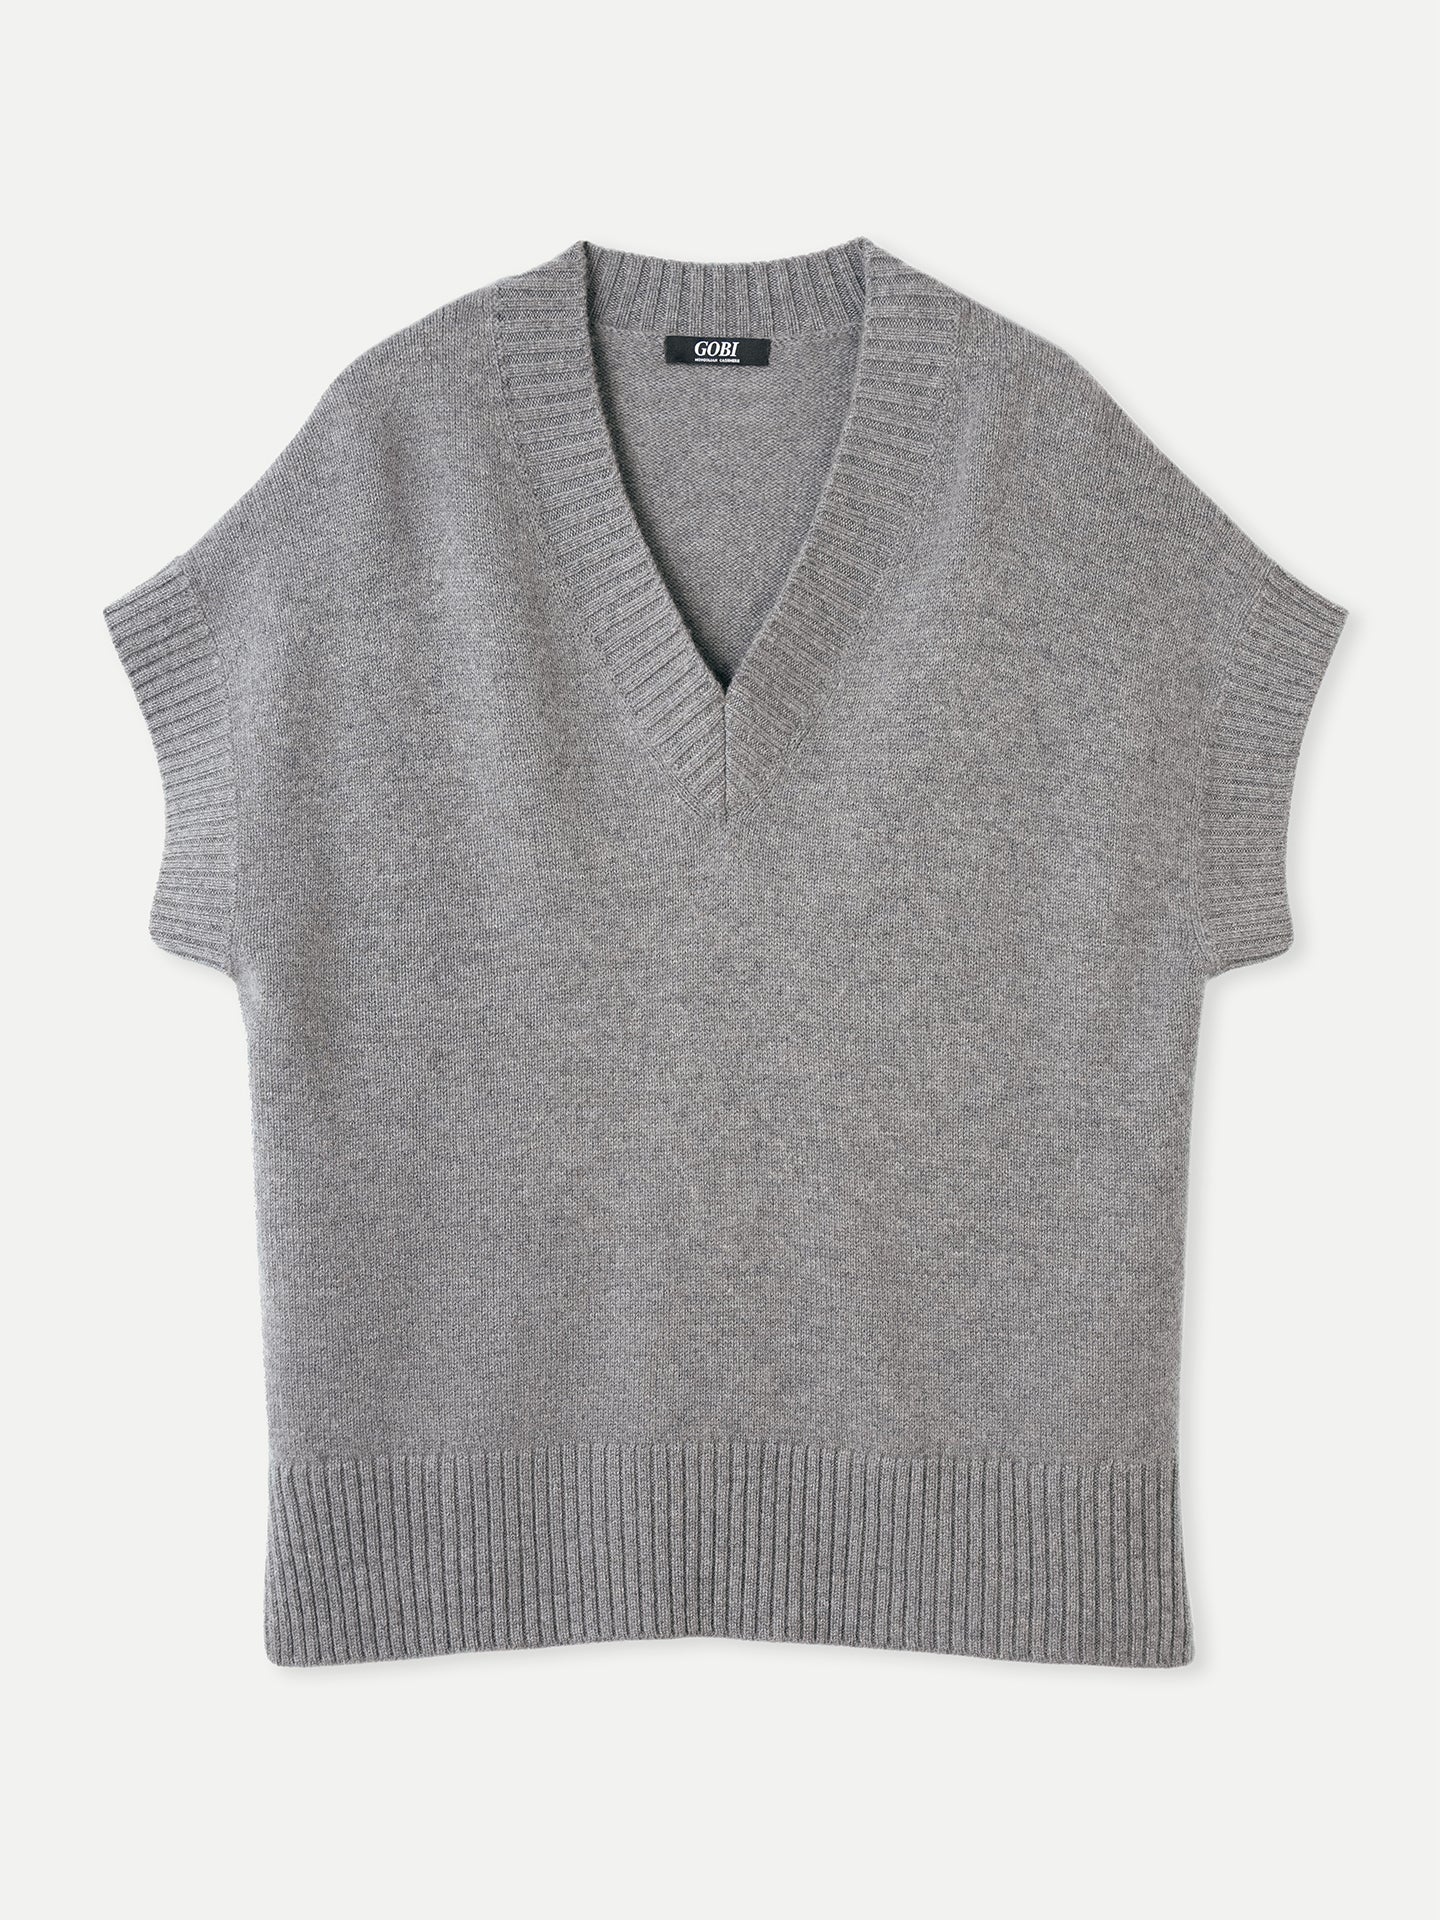 Cashmere V-Neck Sweater with Short Sleeves